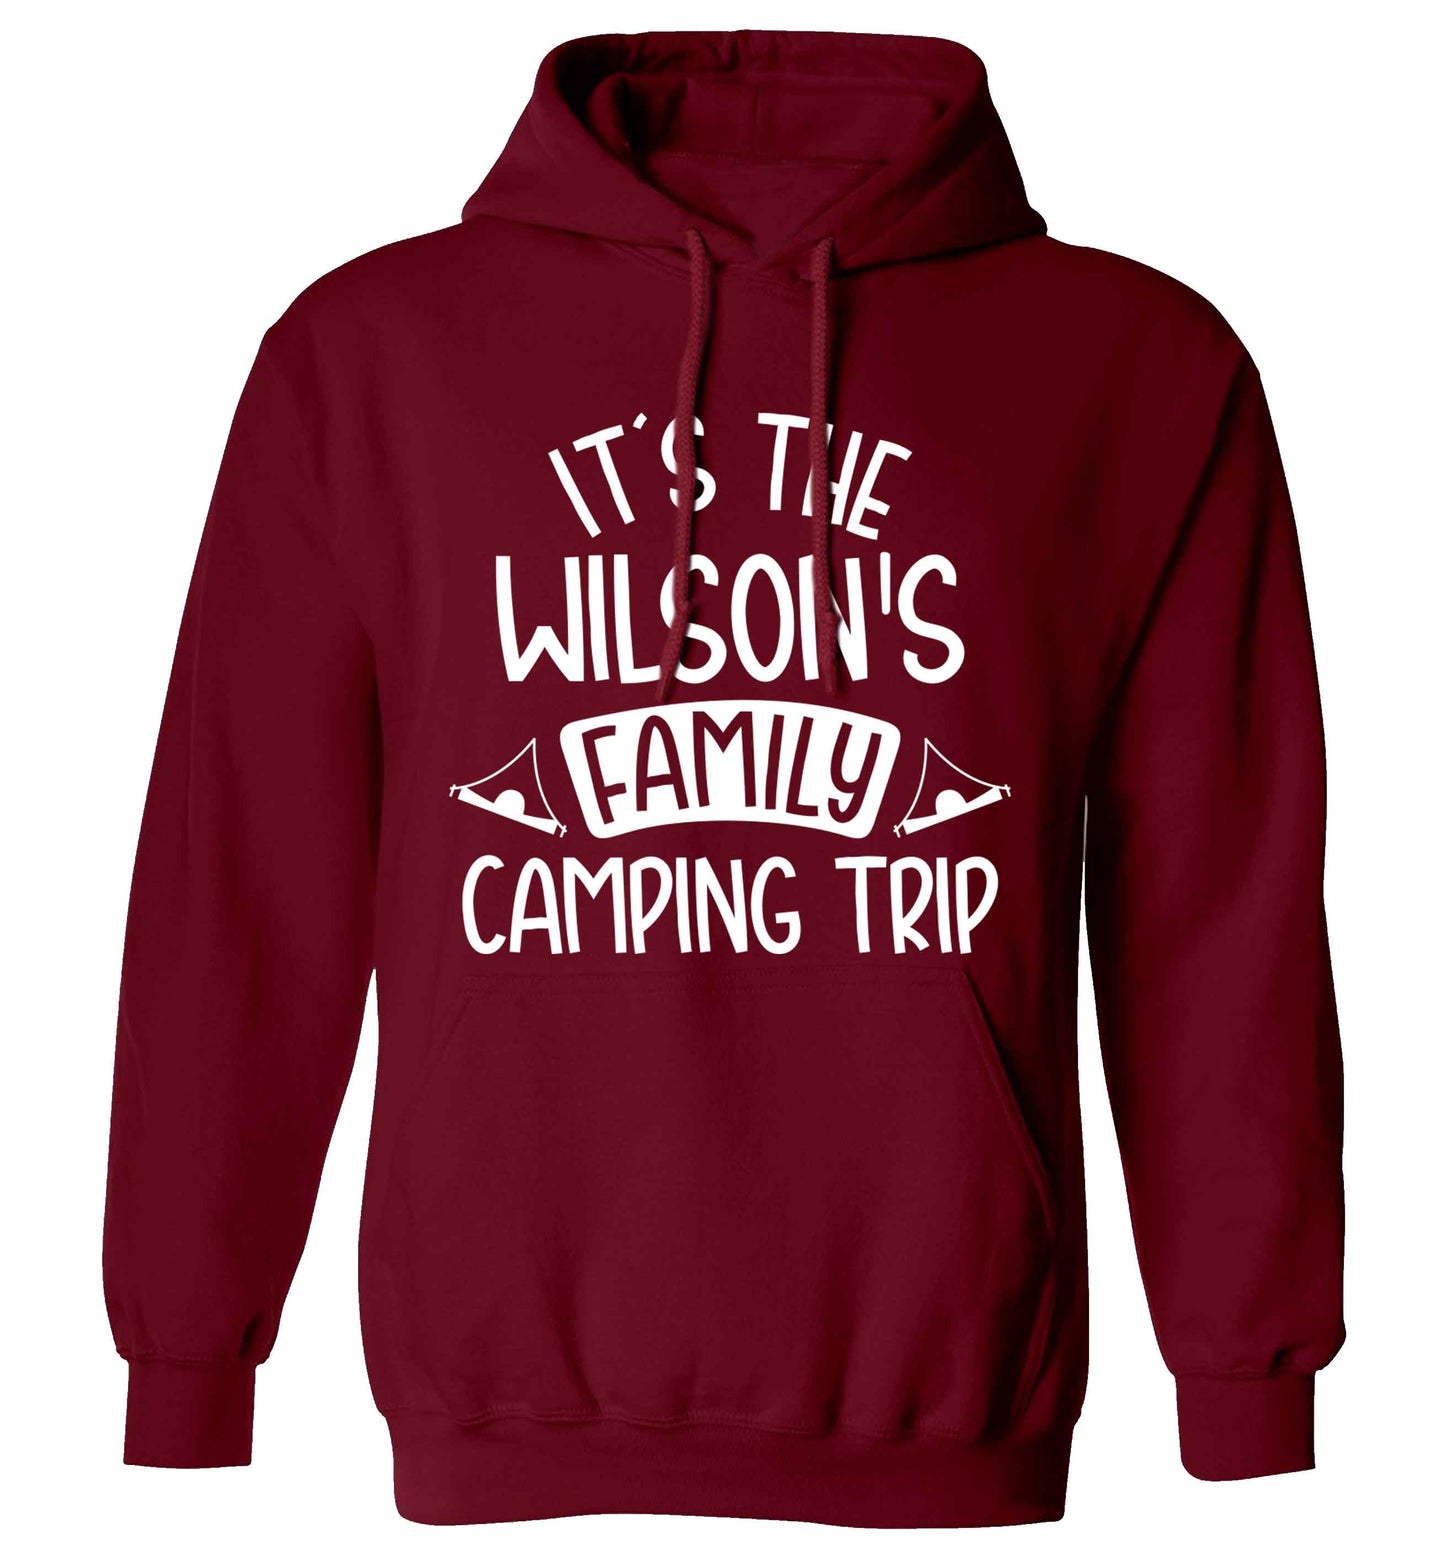 It's the Wilson's family camping trip personalised adults unisex maroon hoodie 2XL